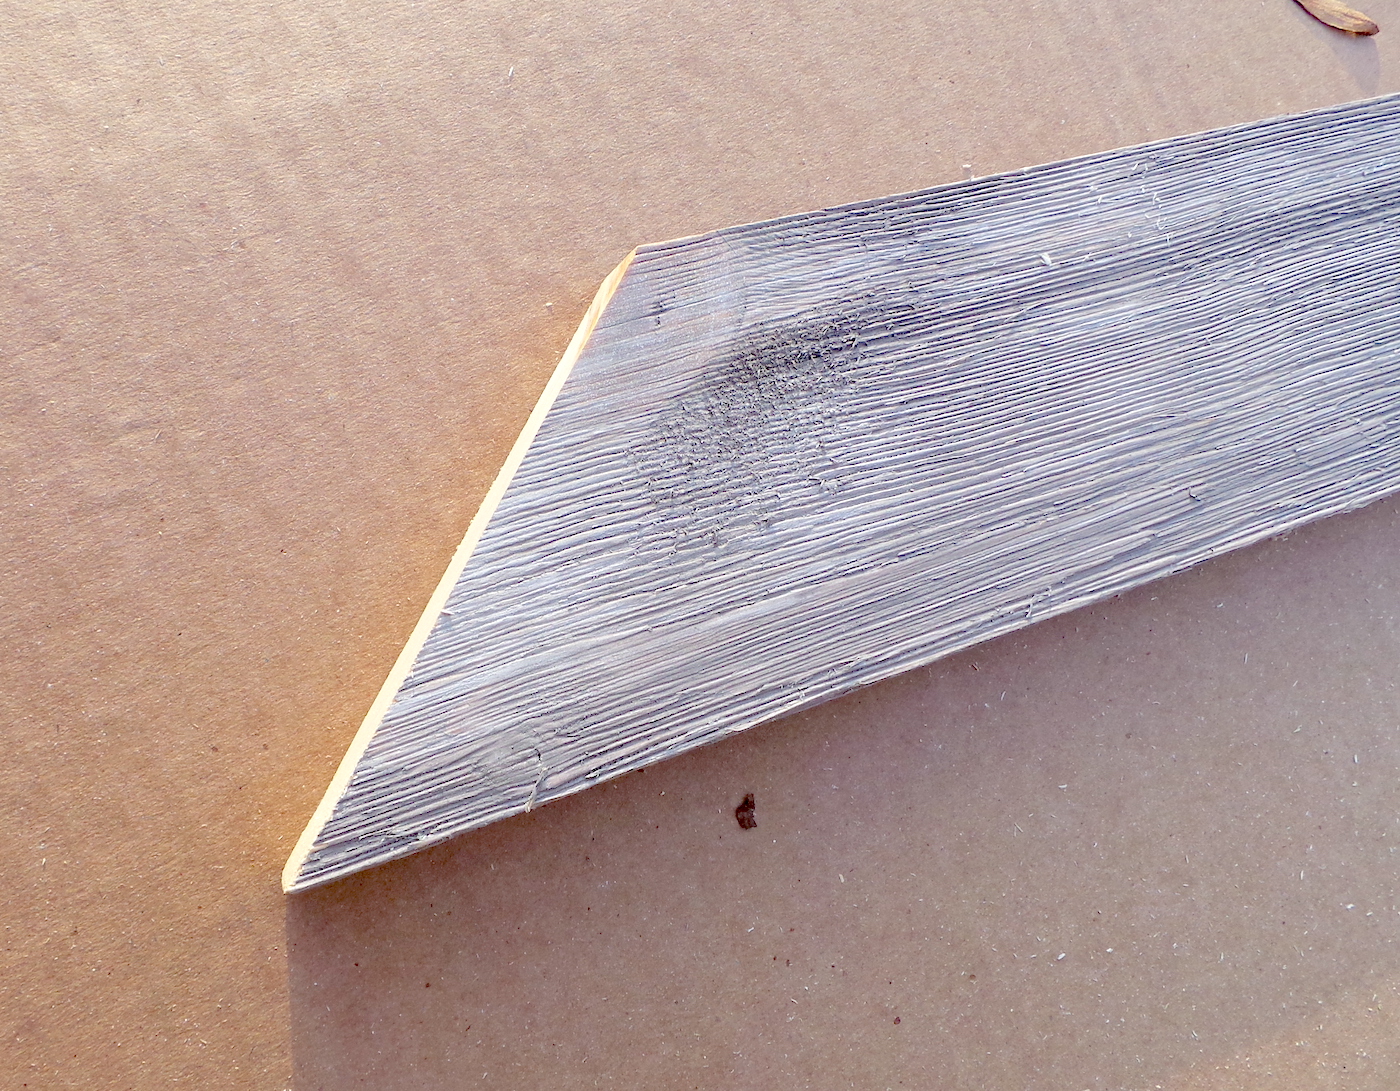 Edges of the barnwood cut to 45 degree angles